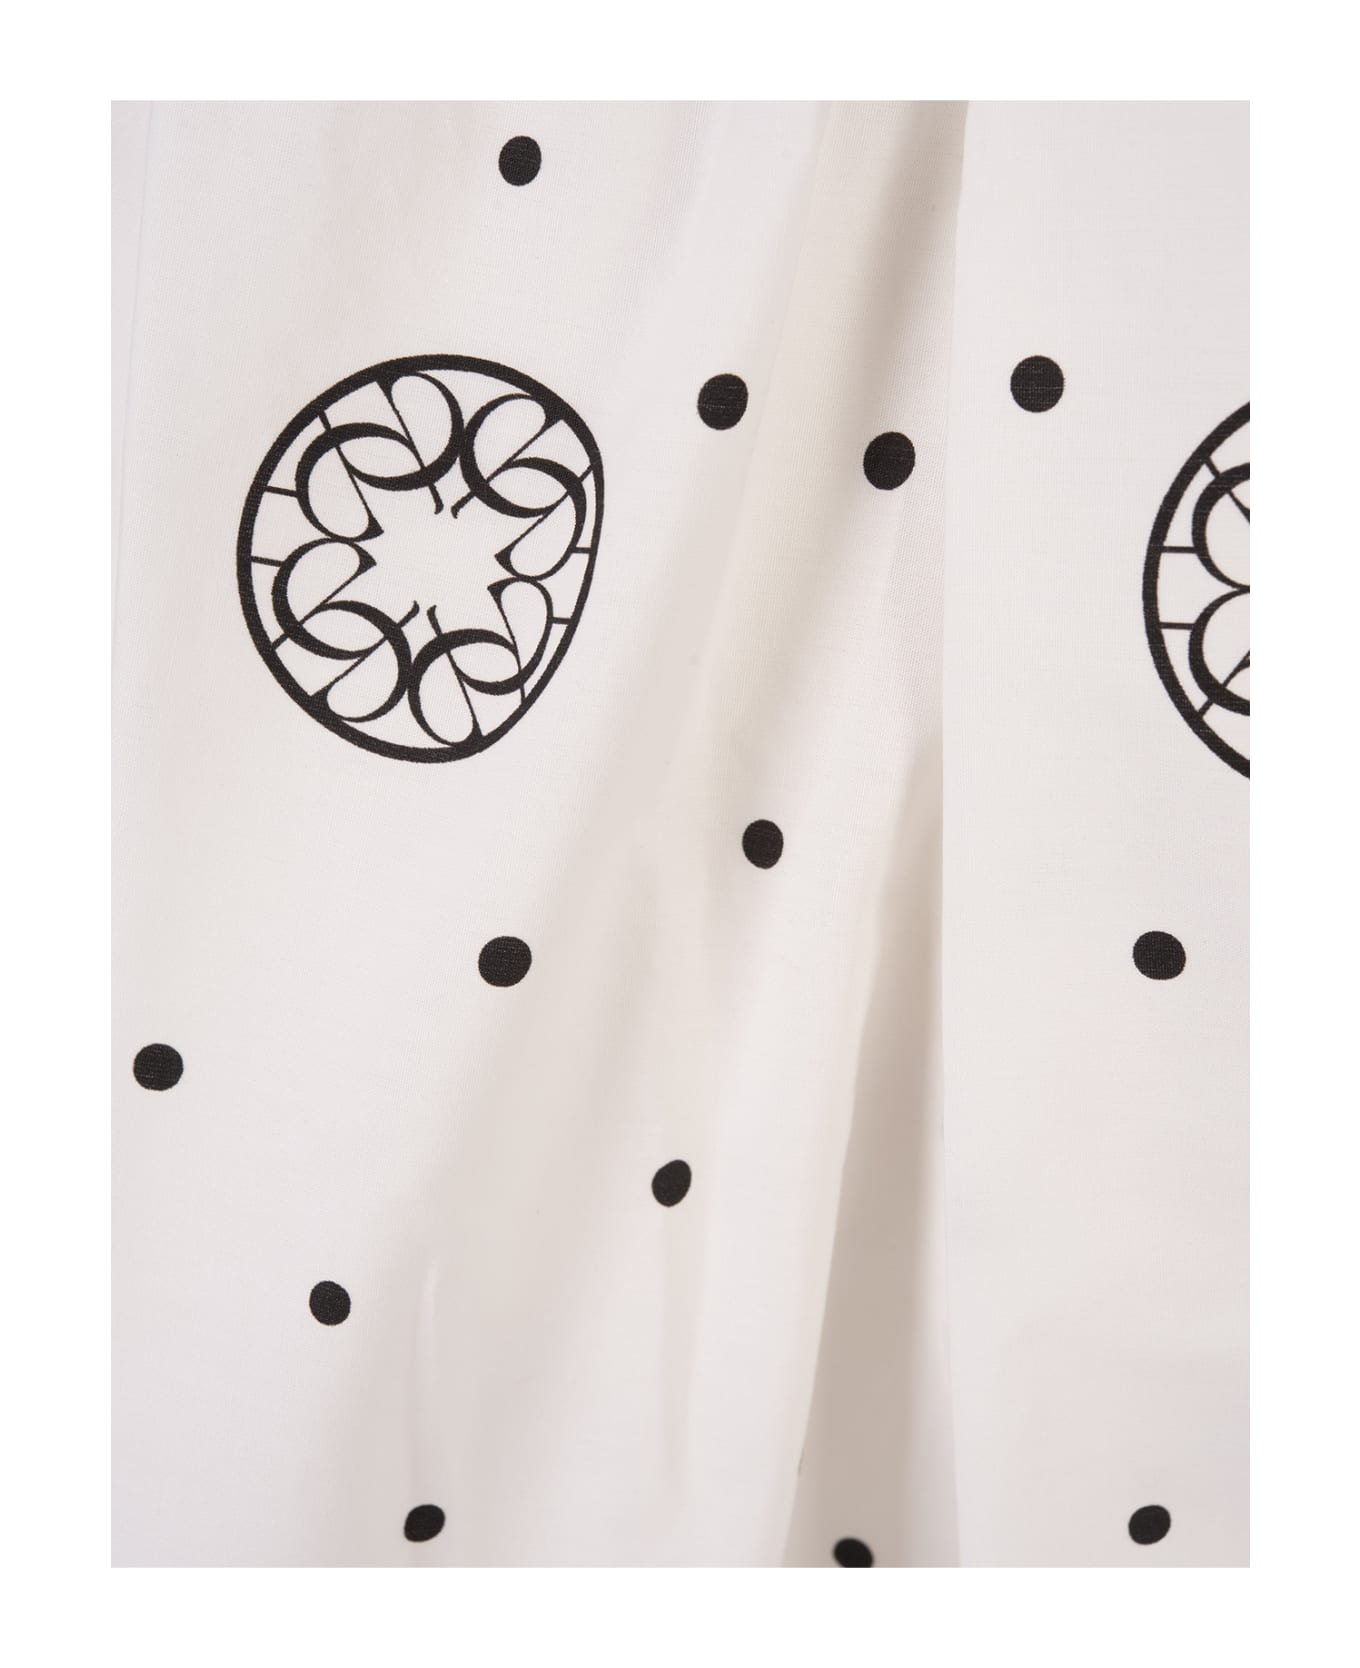 Elie Saab Moon Printed Cotton Dress In White And Black - White